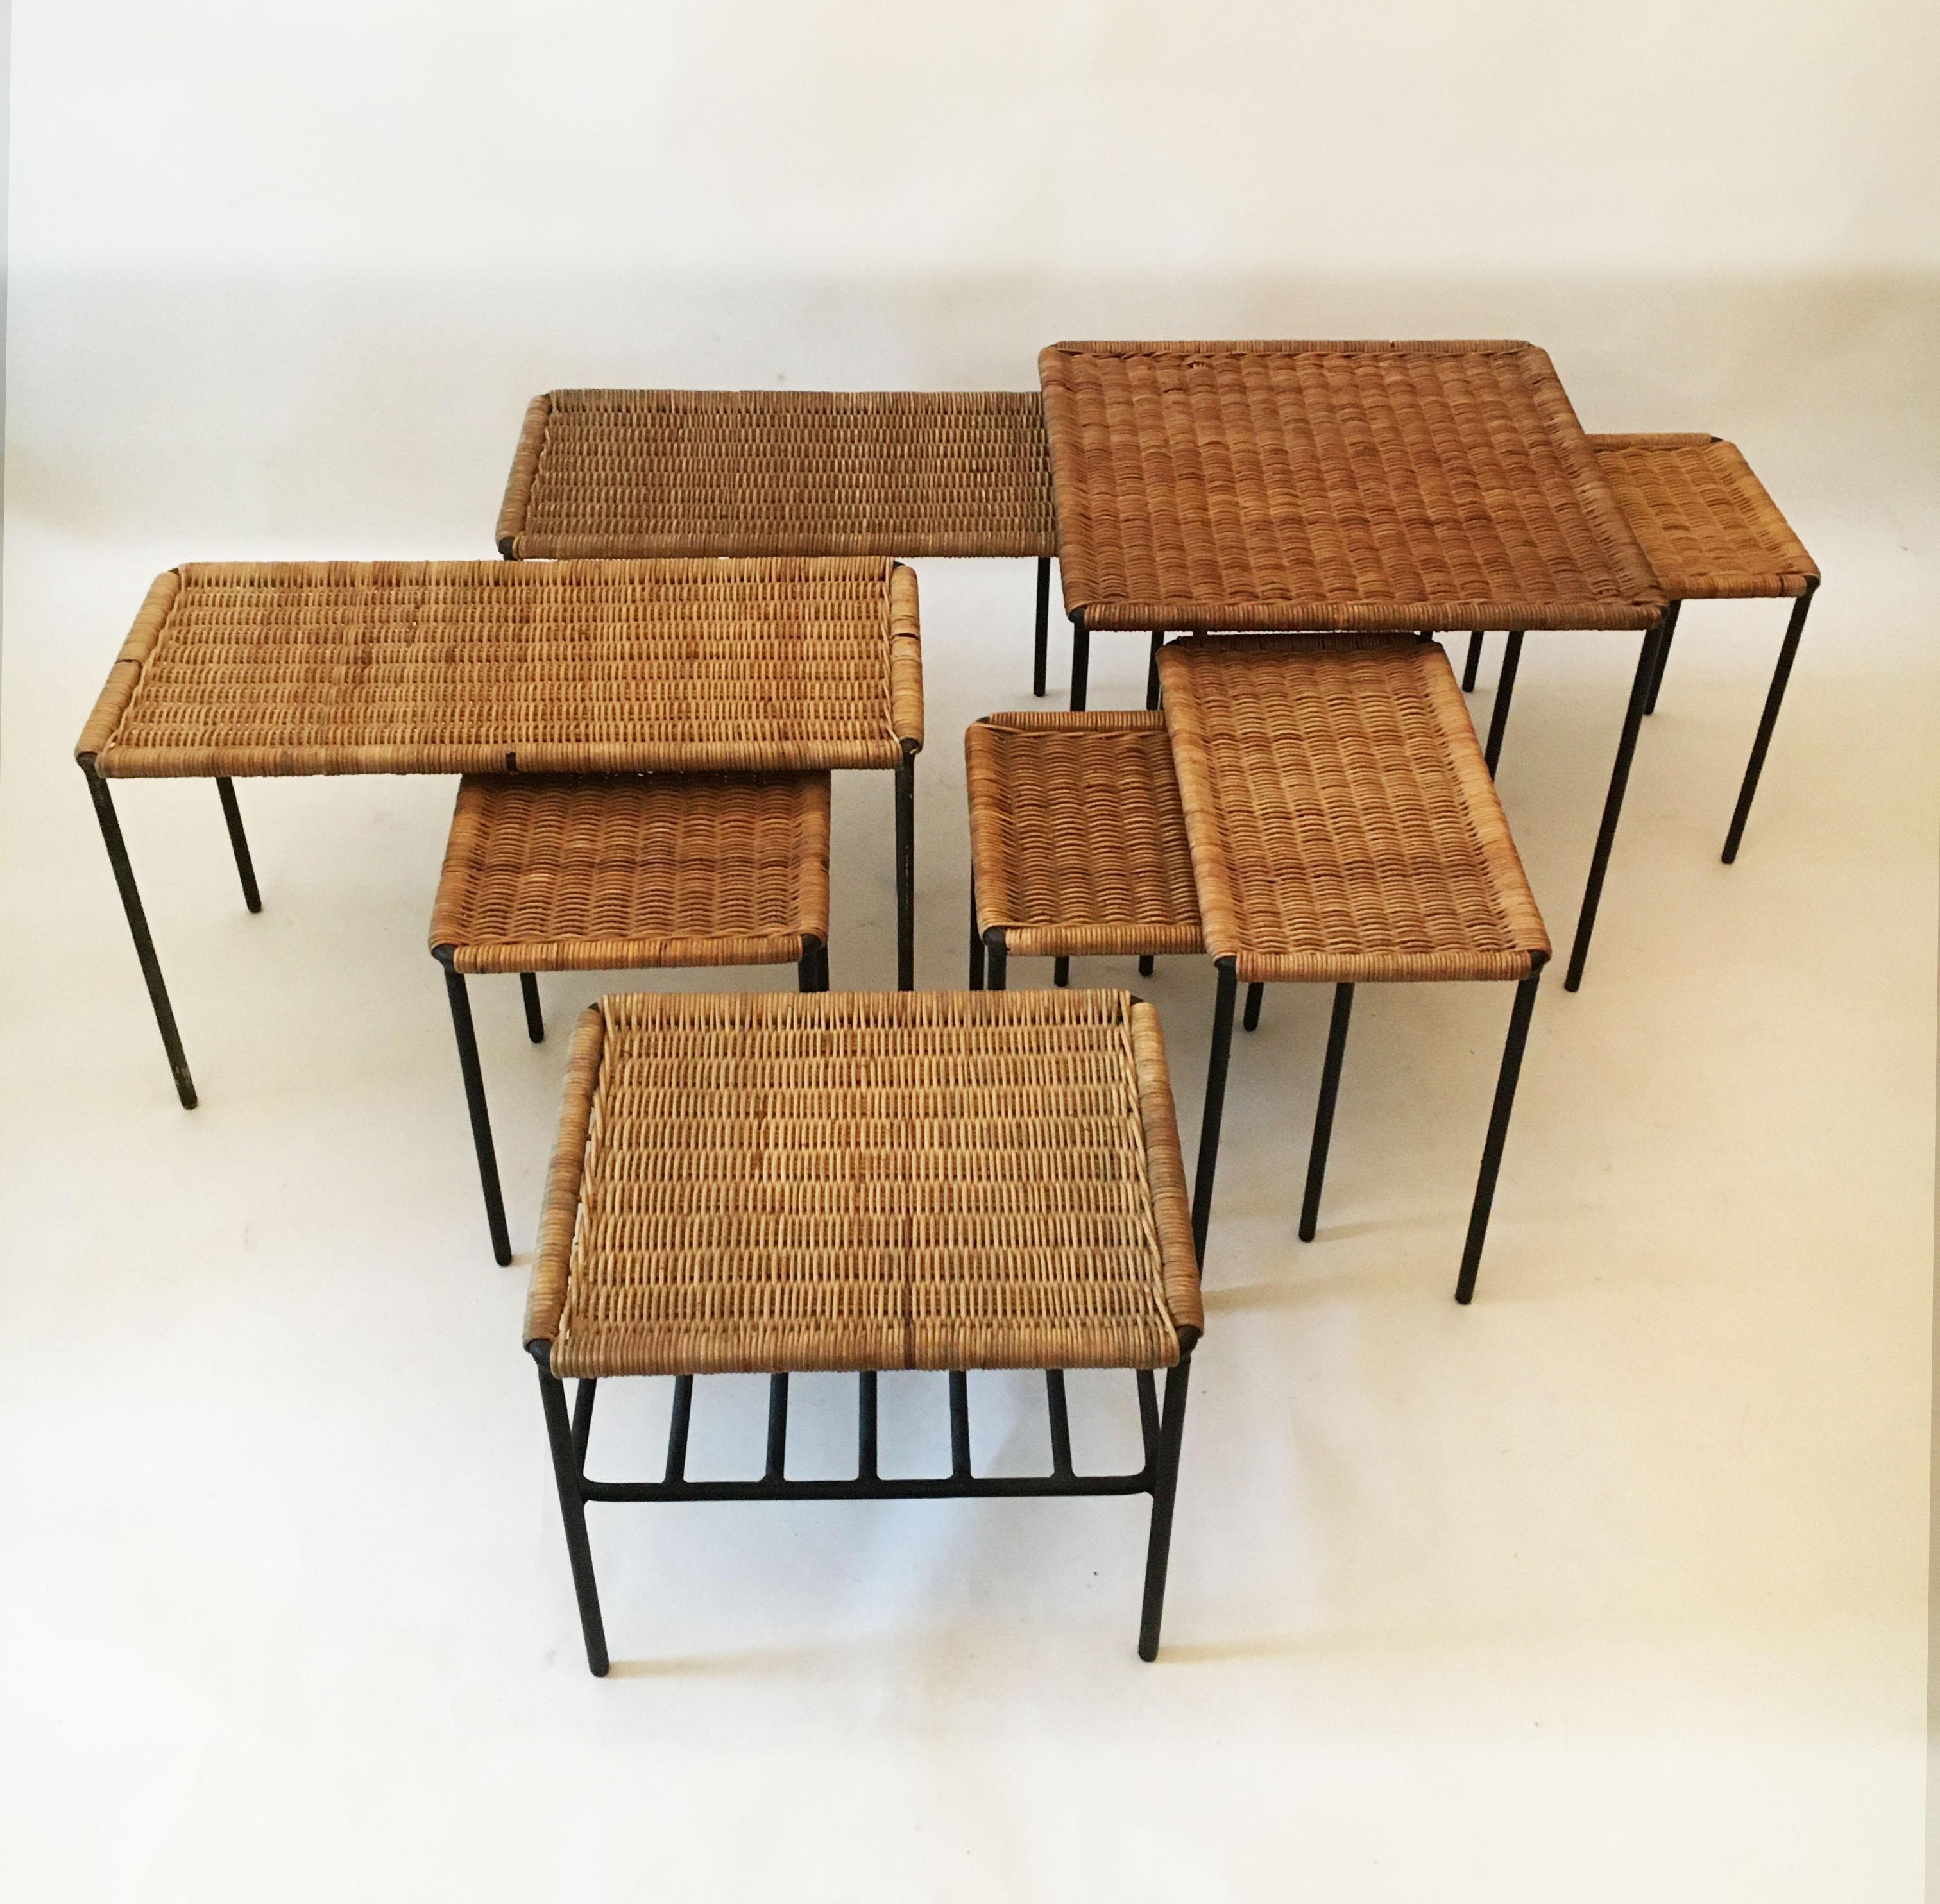 Carl Auböck II woven wicker Table collection, set of eight, circa 1950

A rectangular table collection designed and made by Carl Auböck II, Vienna, Austria, circa 1950. The table's frames are made from slender steel bars which has been lacquered